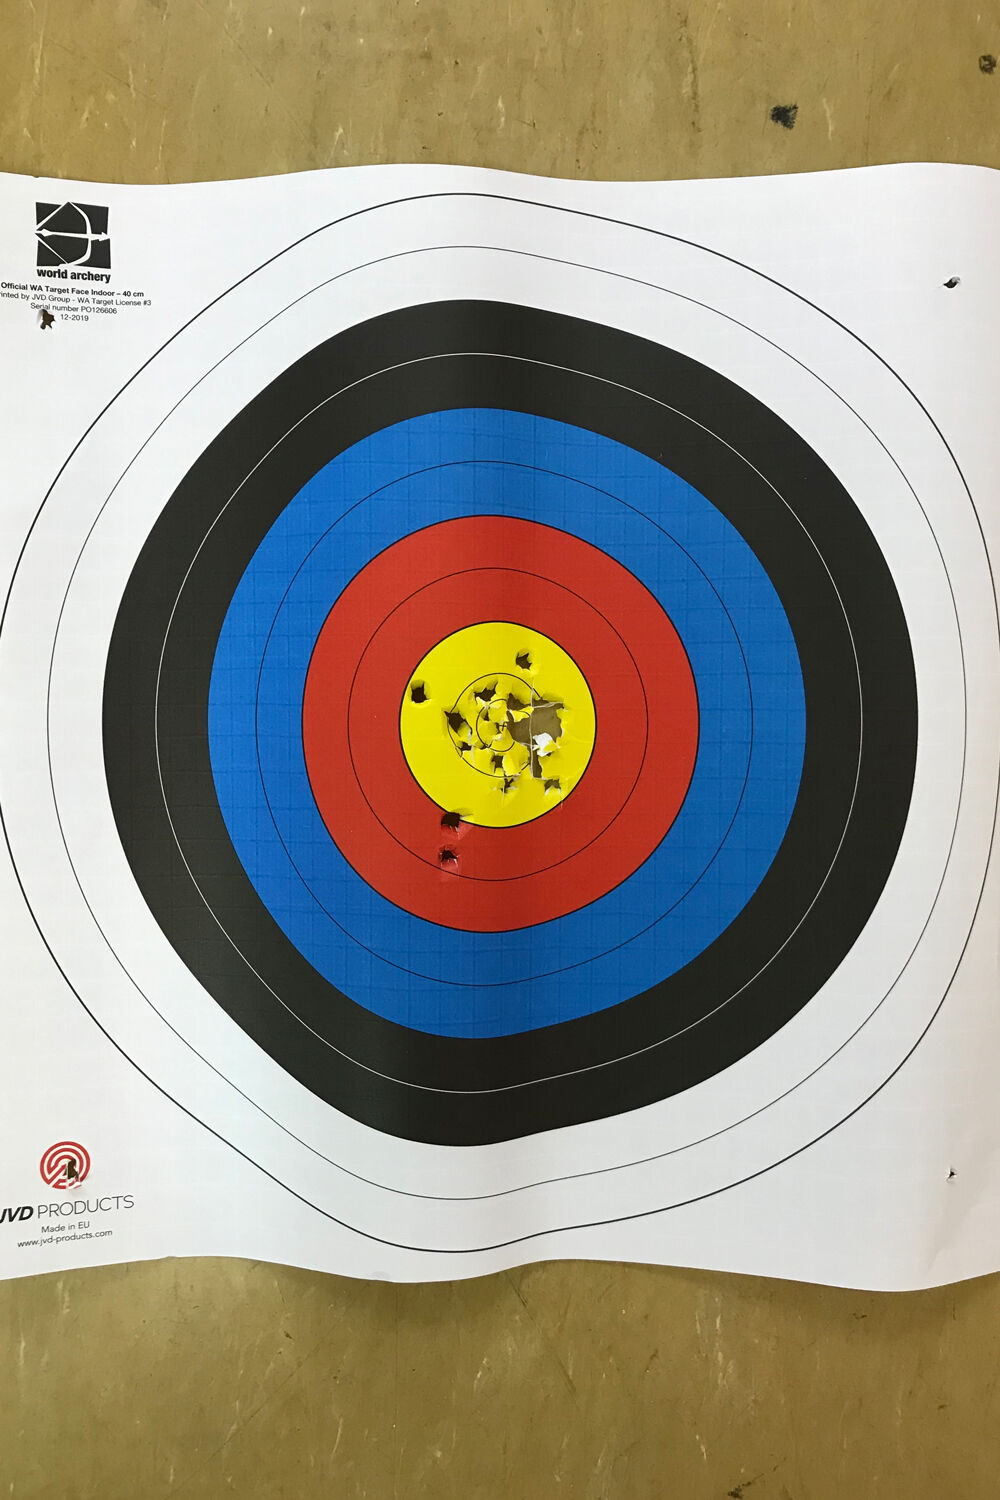 Erik Jonsson’s second-half target for the fourth remote stage of the 2021 Indoor Archery World Series.